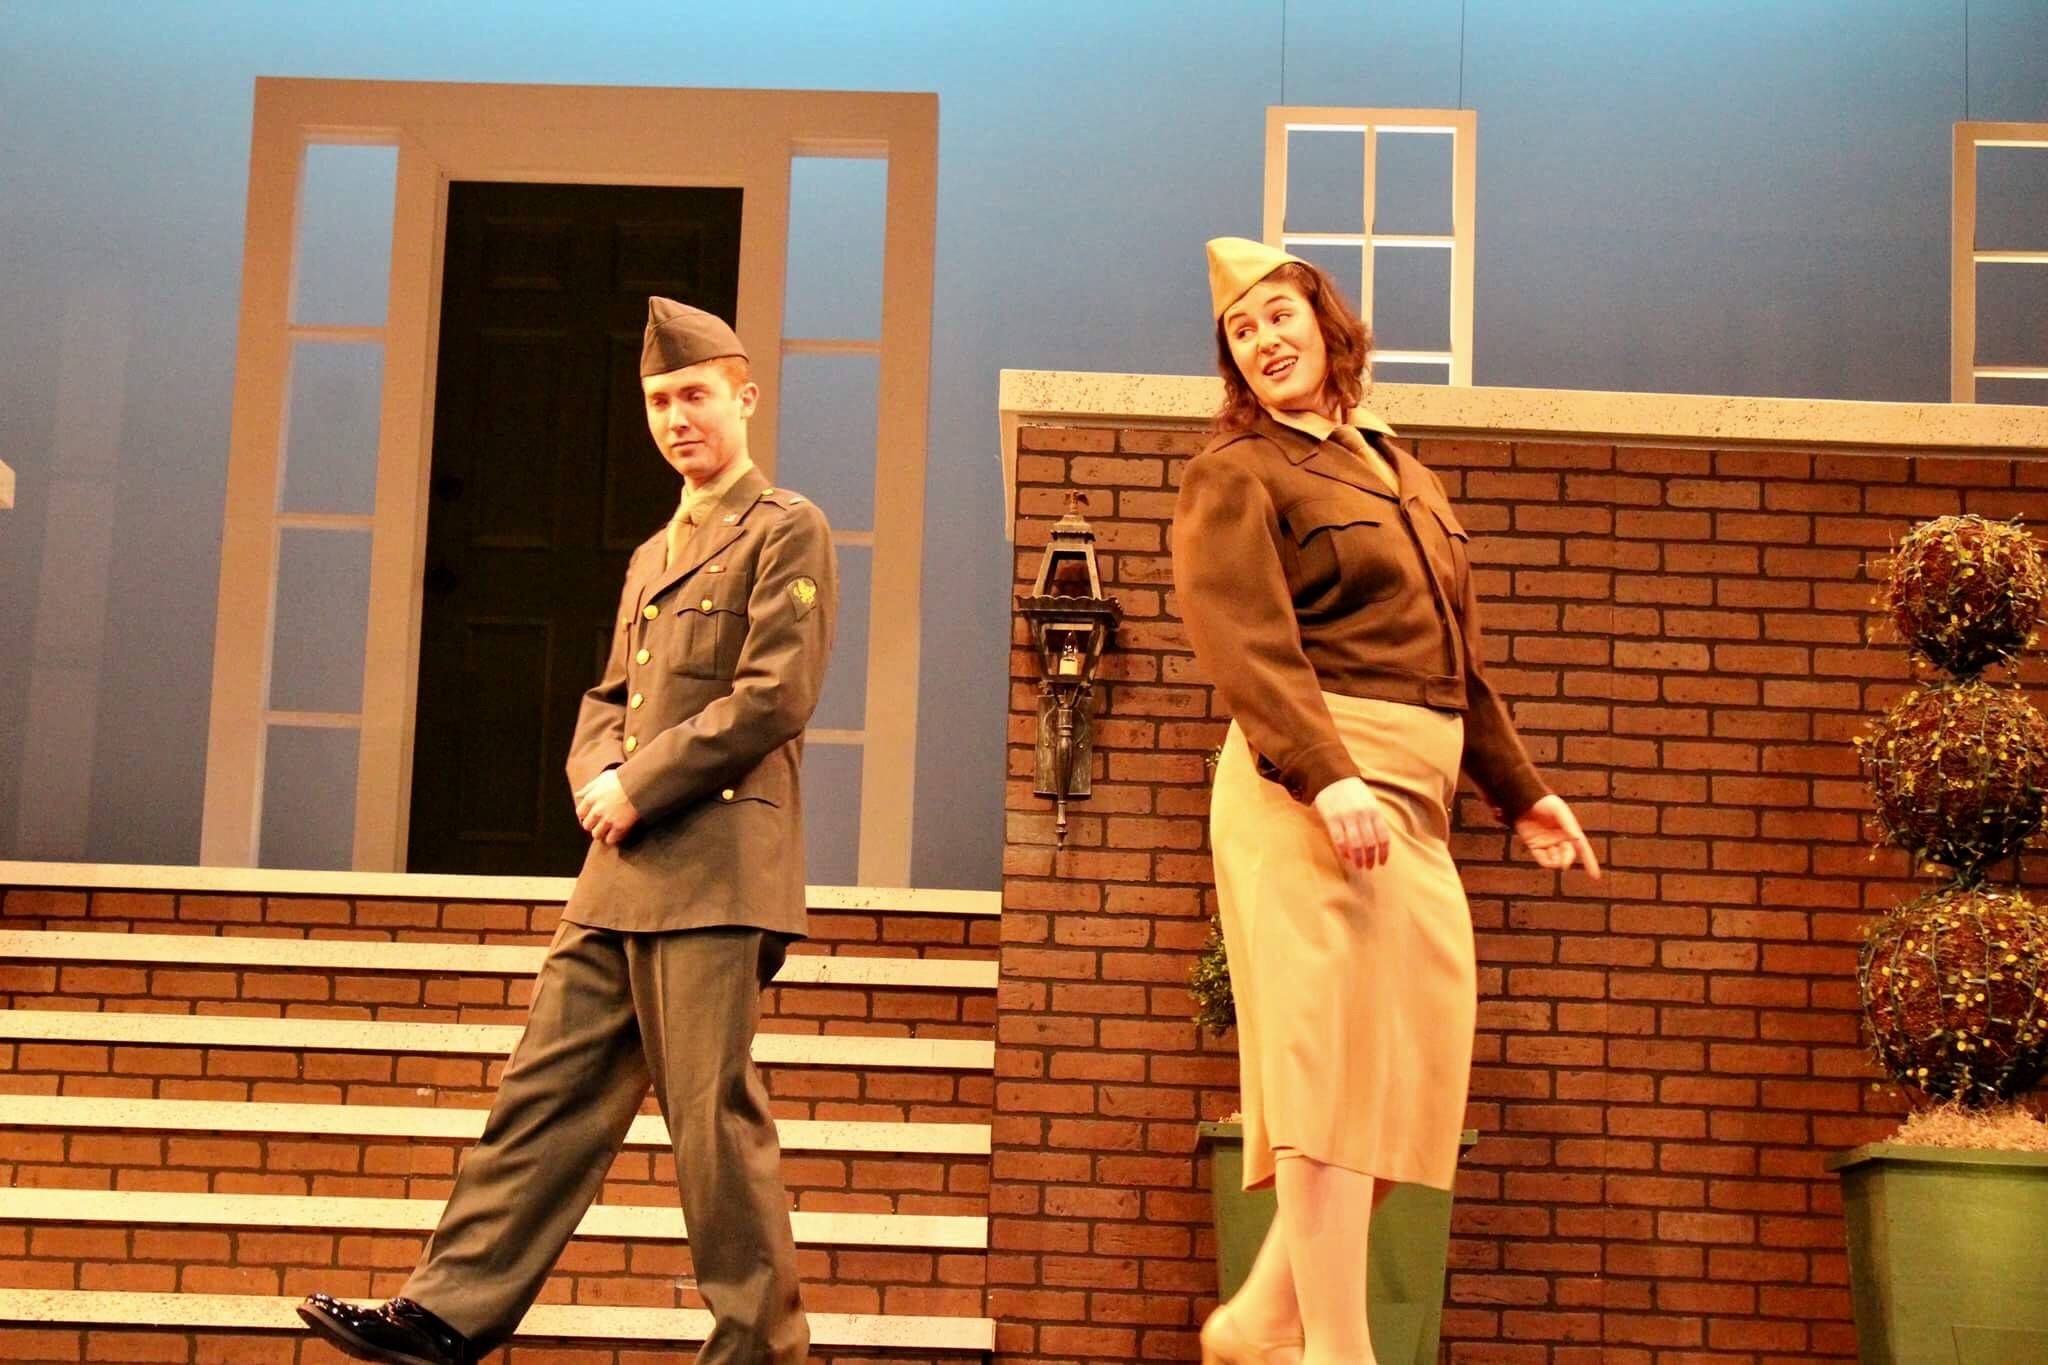 Parkland brings the humor to Shakespeare’s Much Ado About Nothing